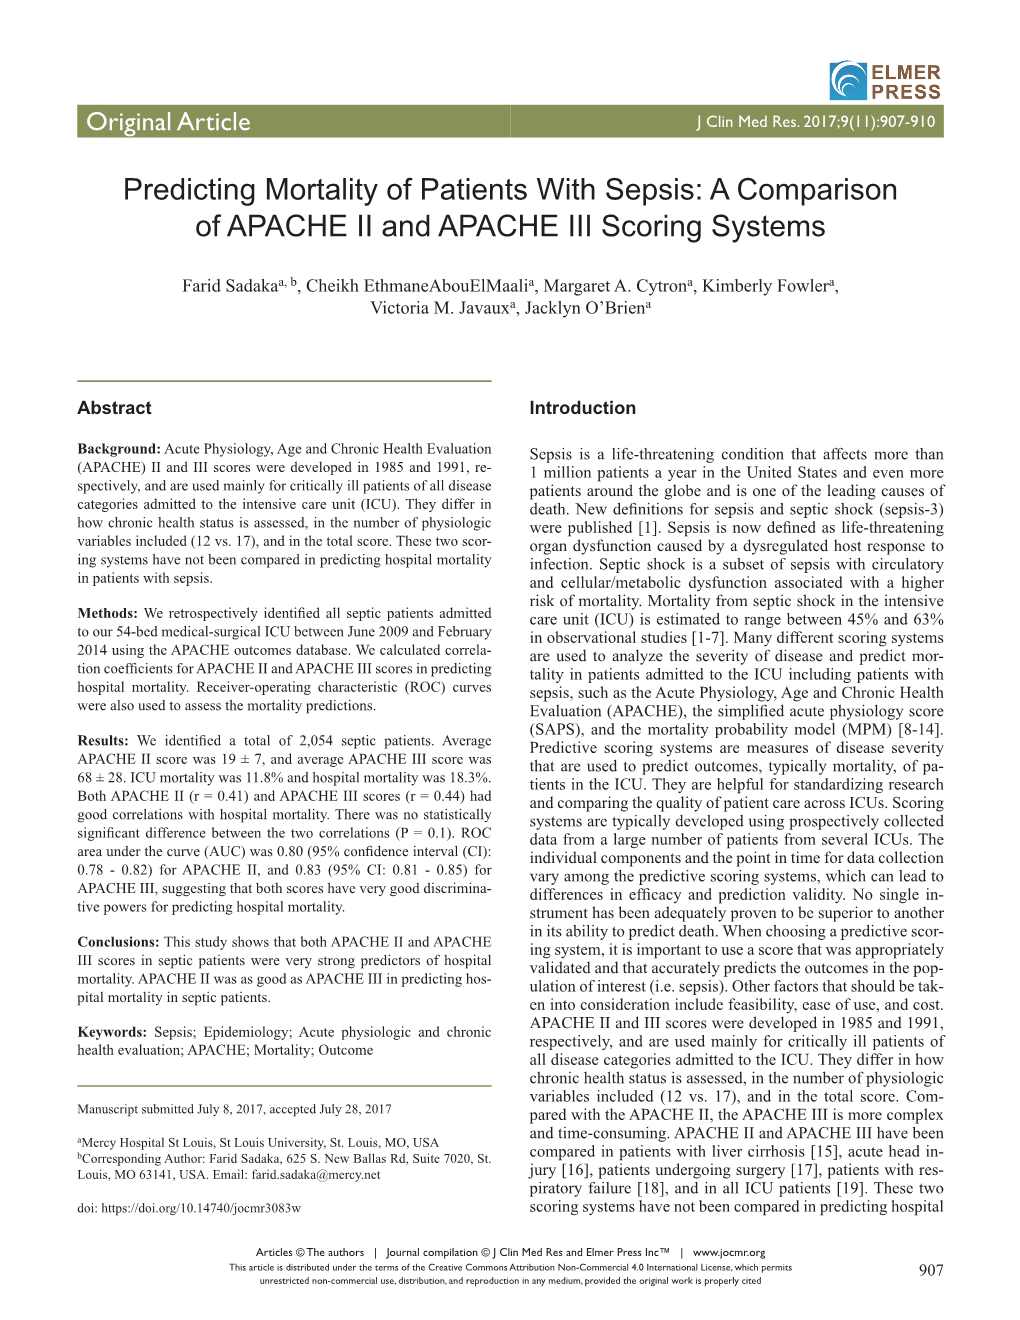 Predicting Mortality of Patients with Sepsis: a Comparison of APACHE II and APACHE III Scoring Systems